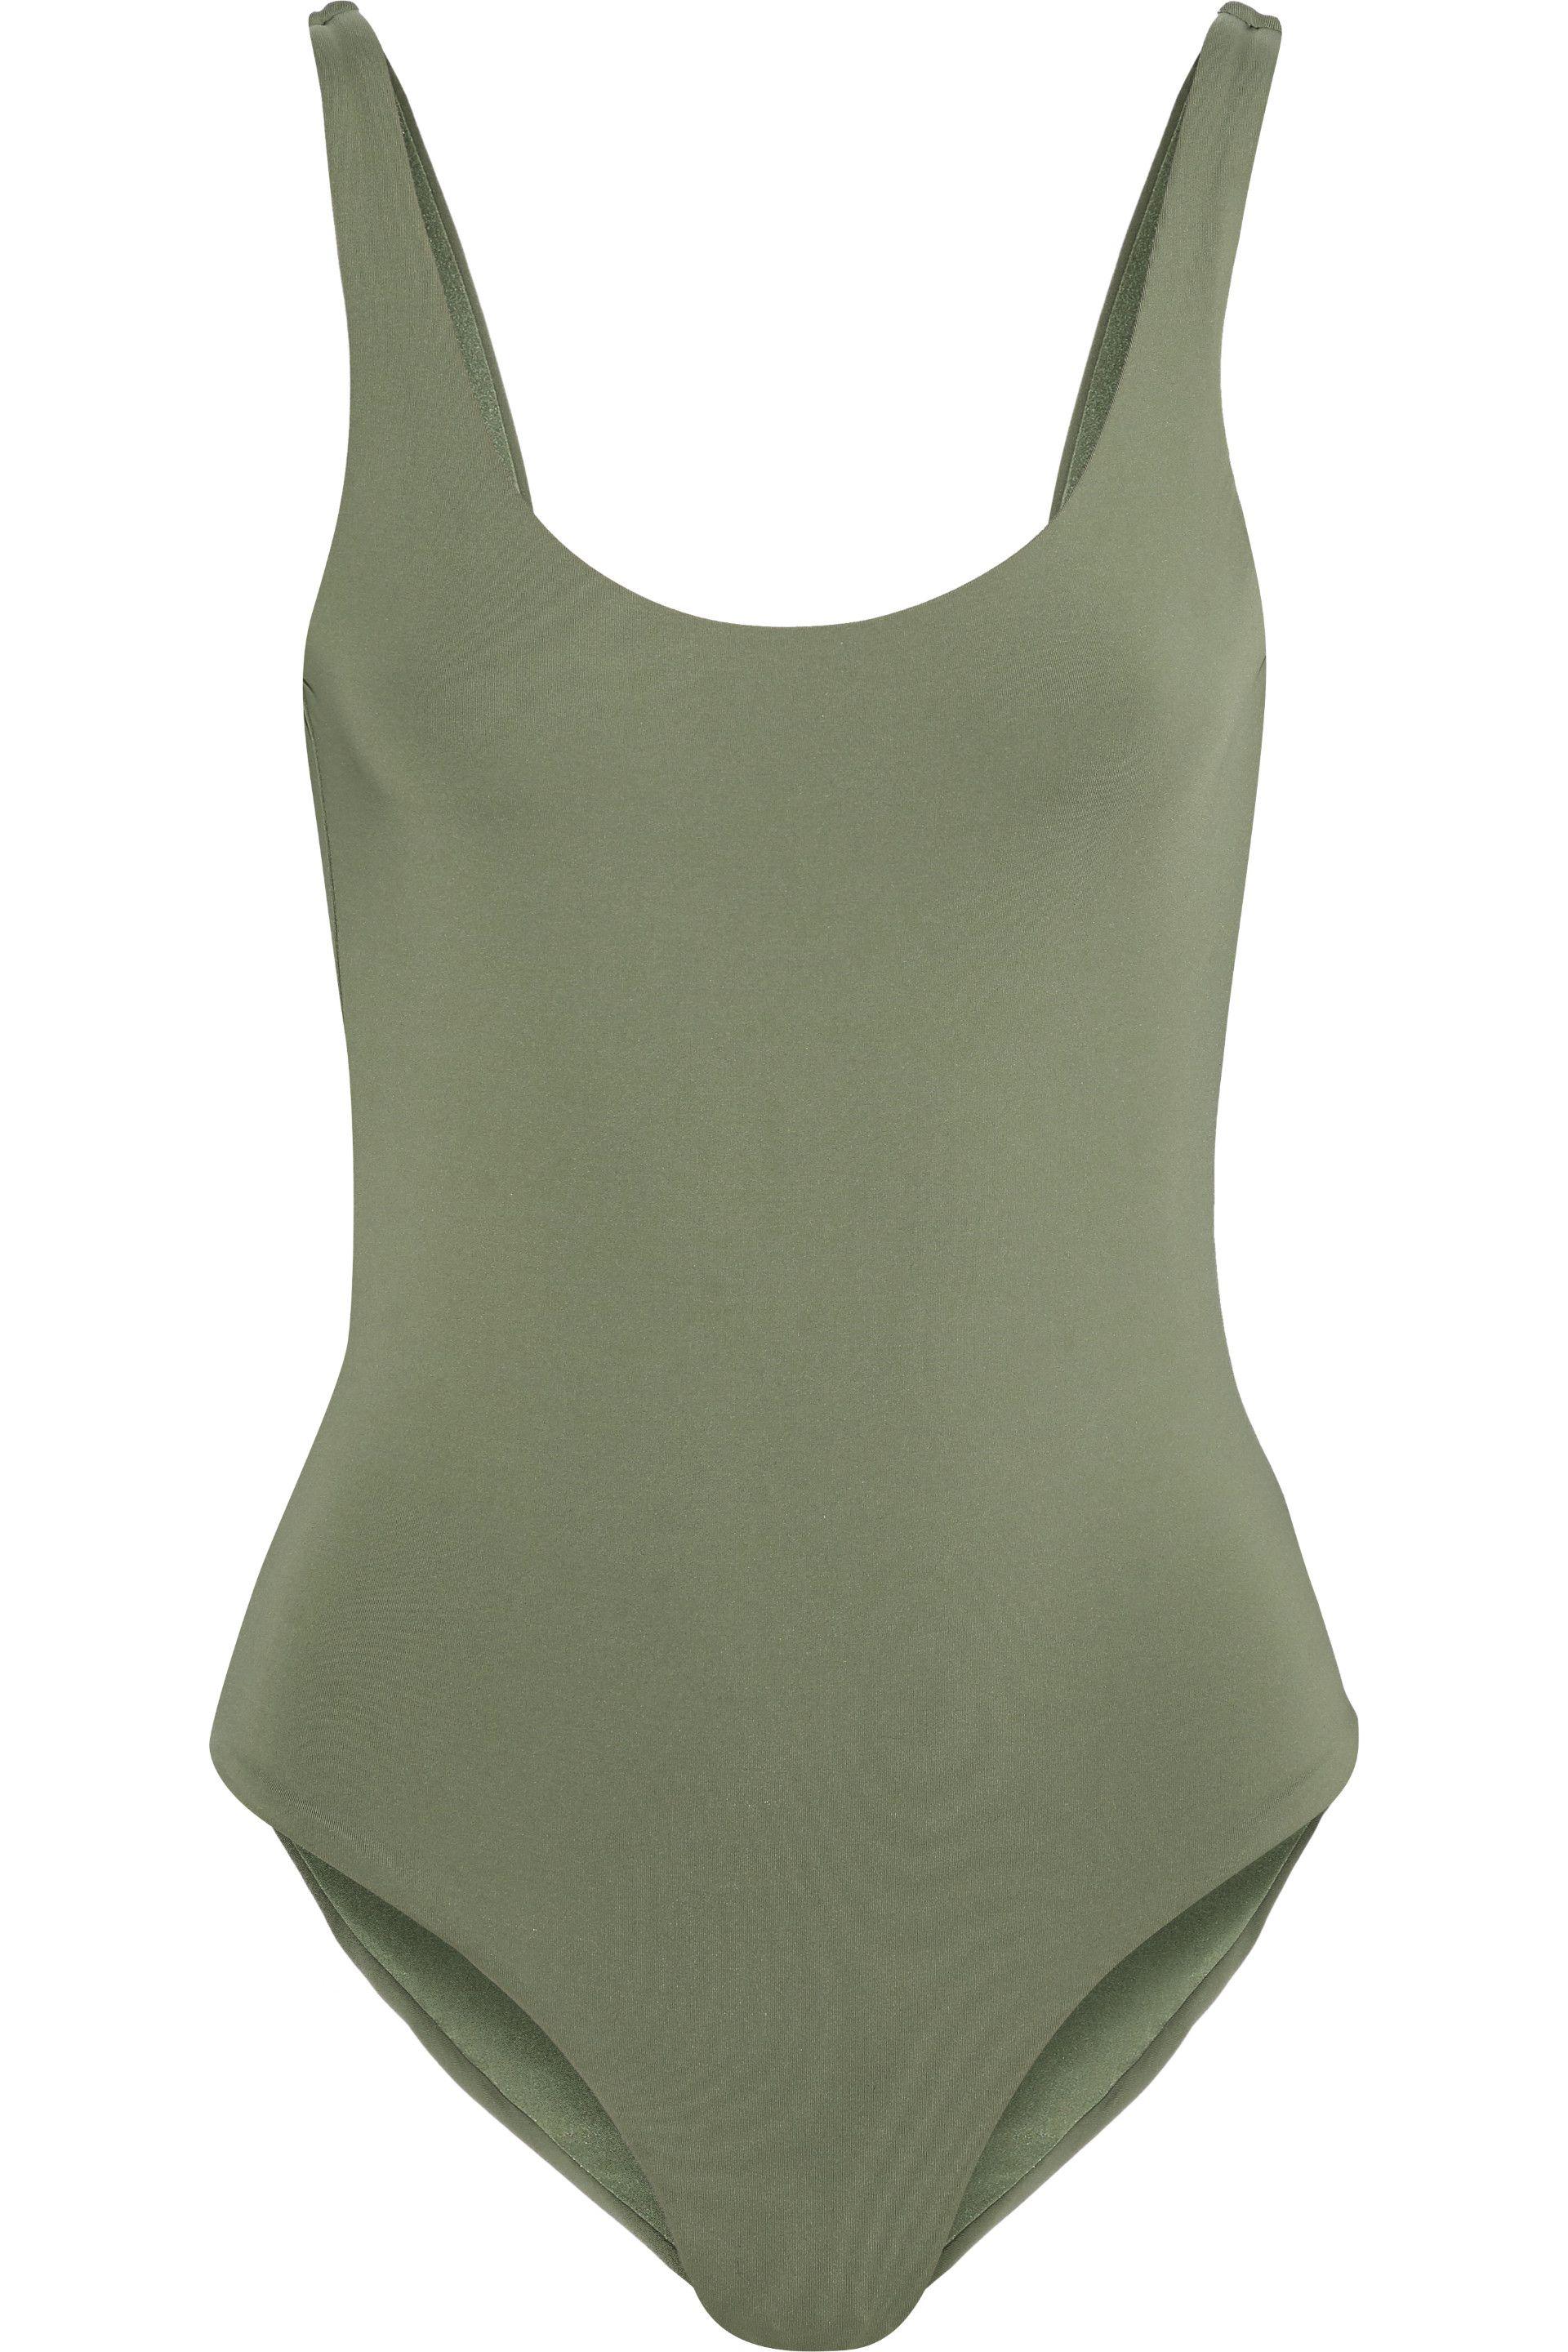 Onia Synthetic Kelly Swimsuit Army Green - Lyst